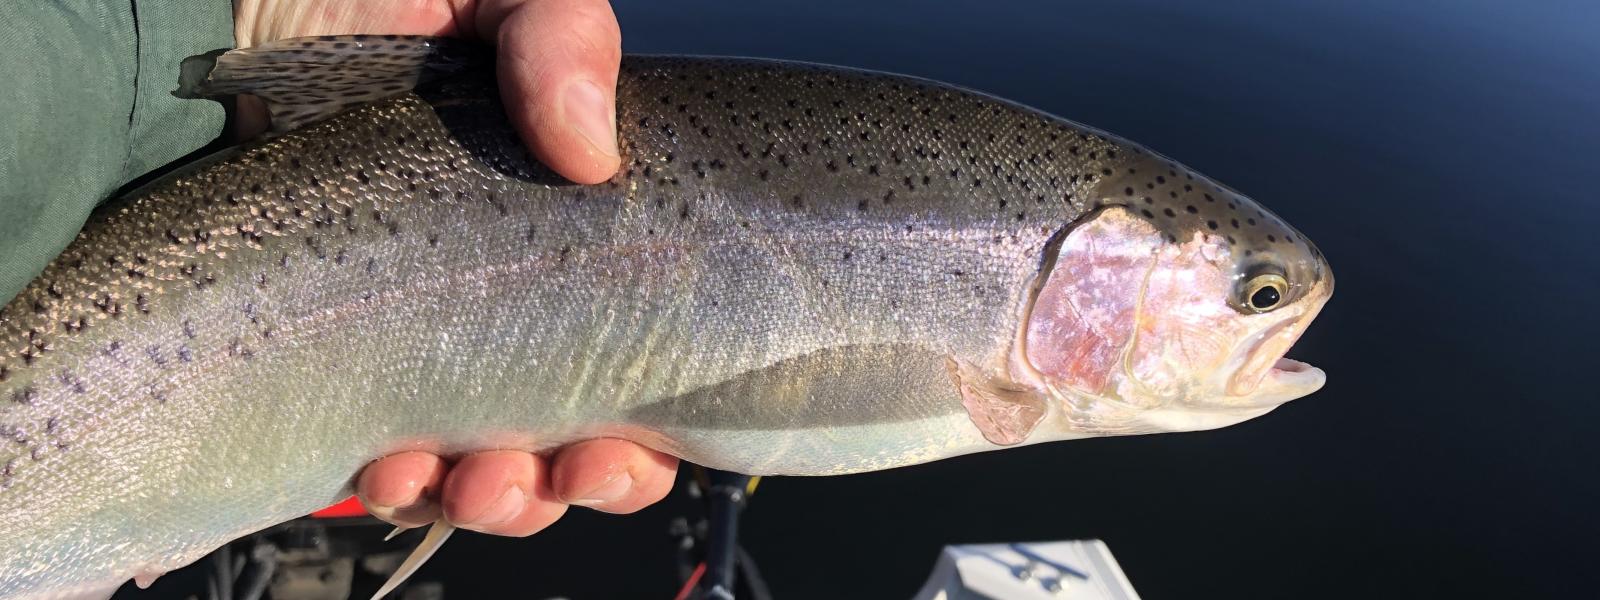 Stocked rainbow trout from Hog Canyon Lake